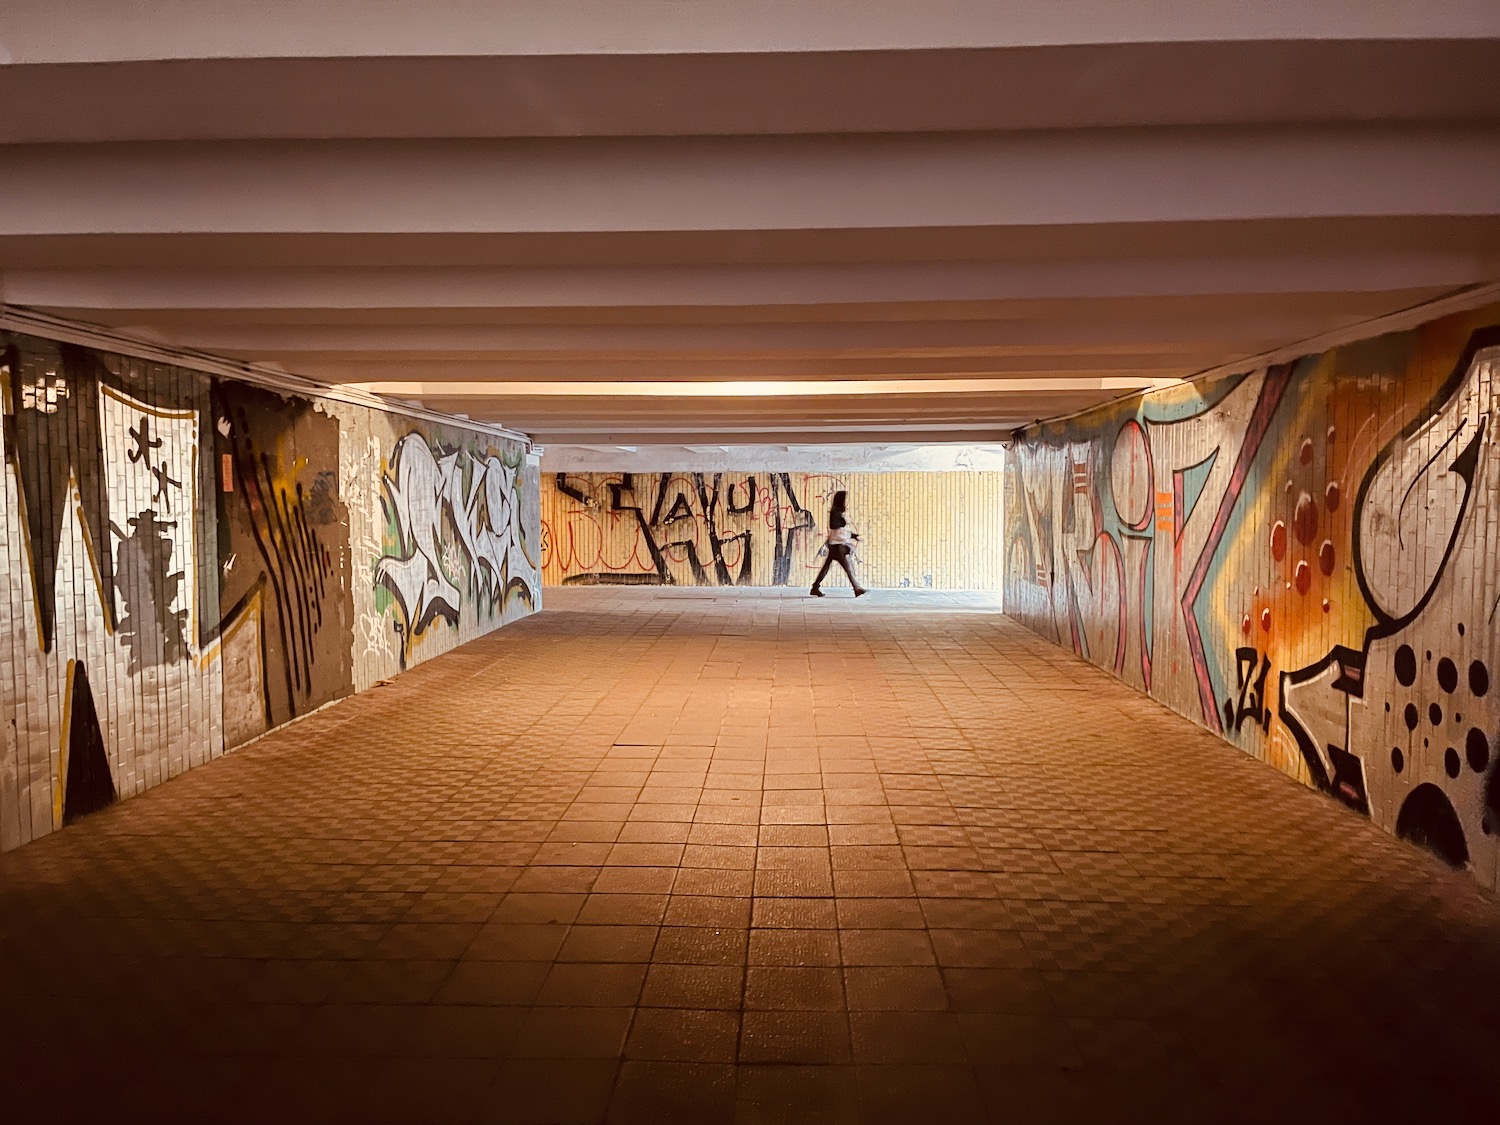 a person walking in a tunnel with graffiti on walls